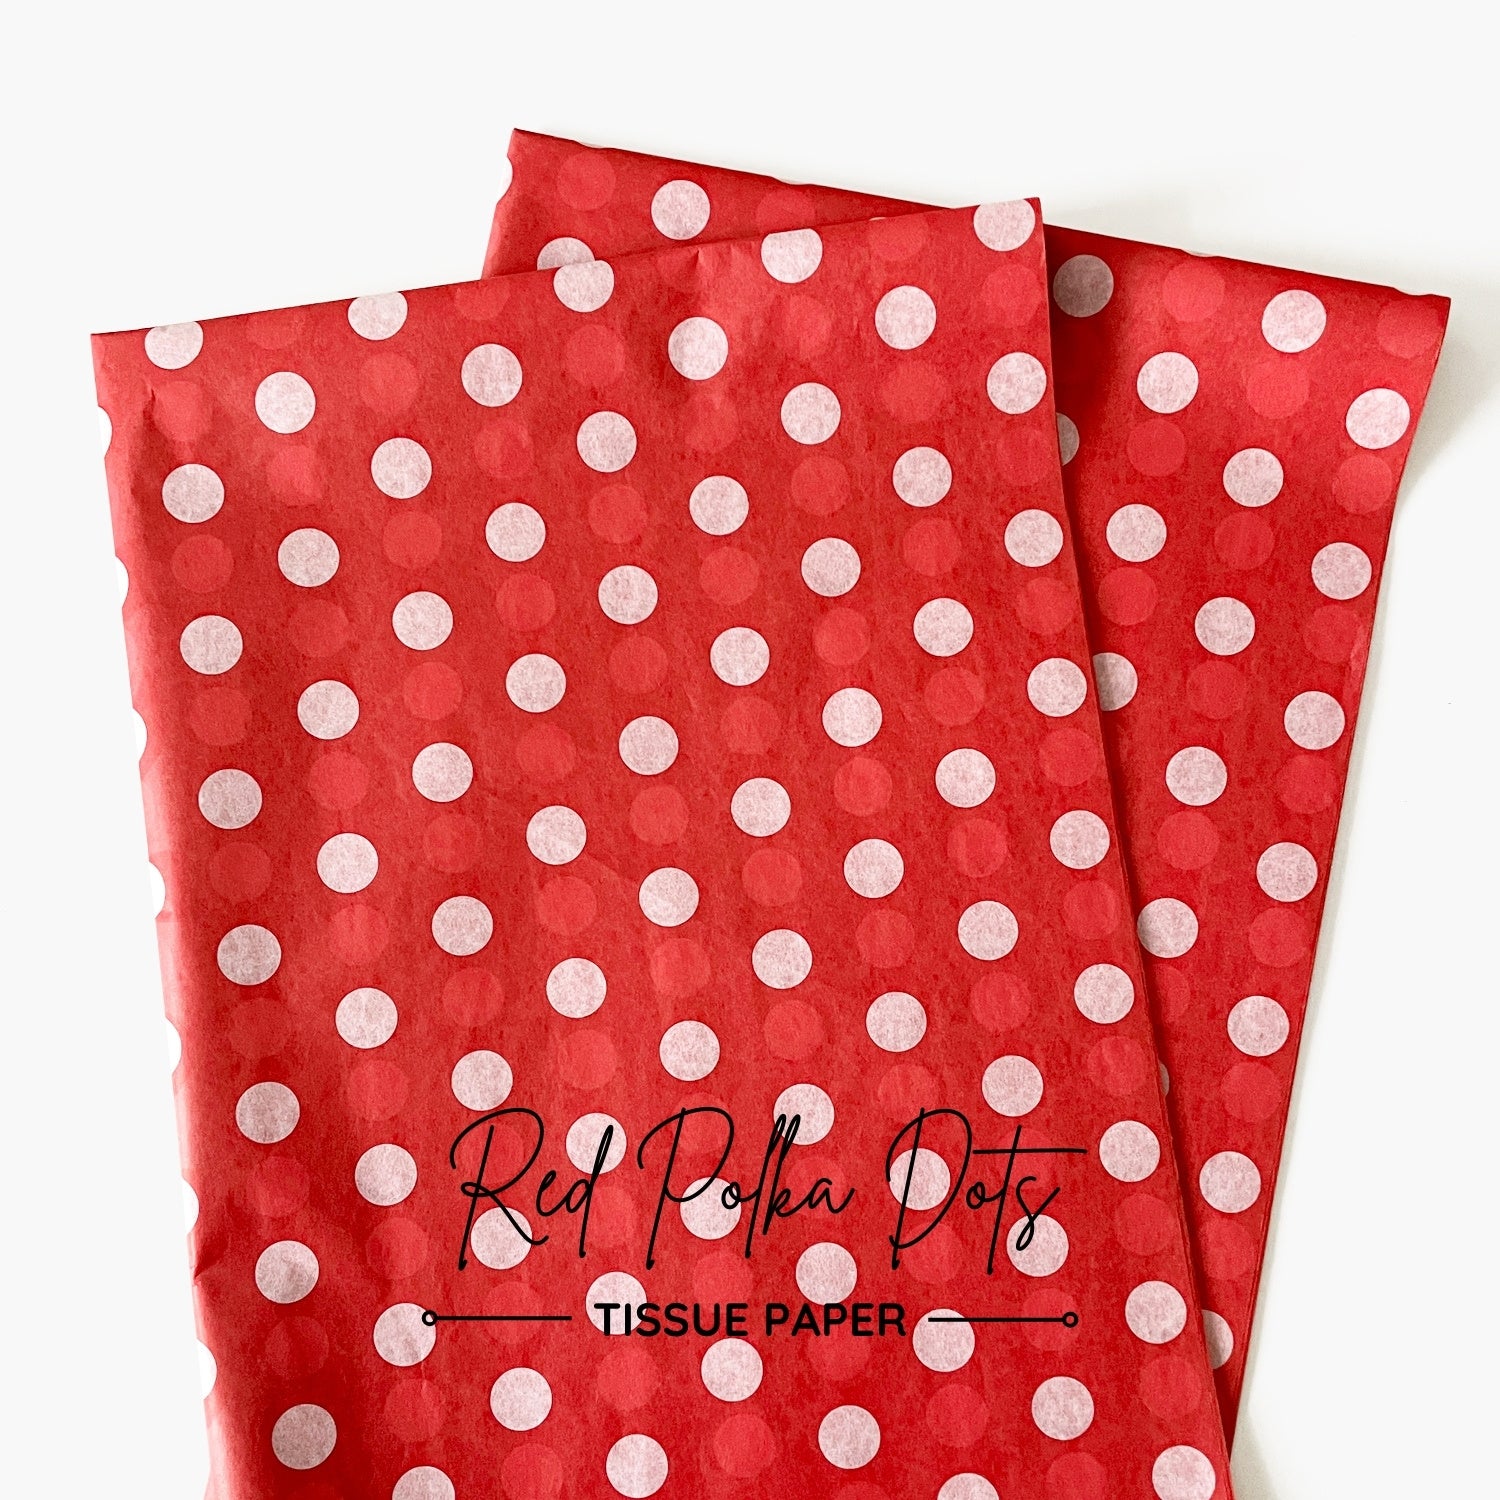 Red Polka Dots Patterned Tissue Paper - Gift Wrapping - Enchanted Woodland Mushroom Stationery Paper - Hand Craft Supplies